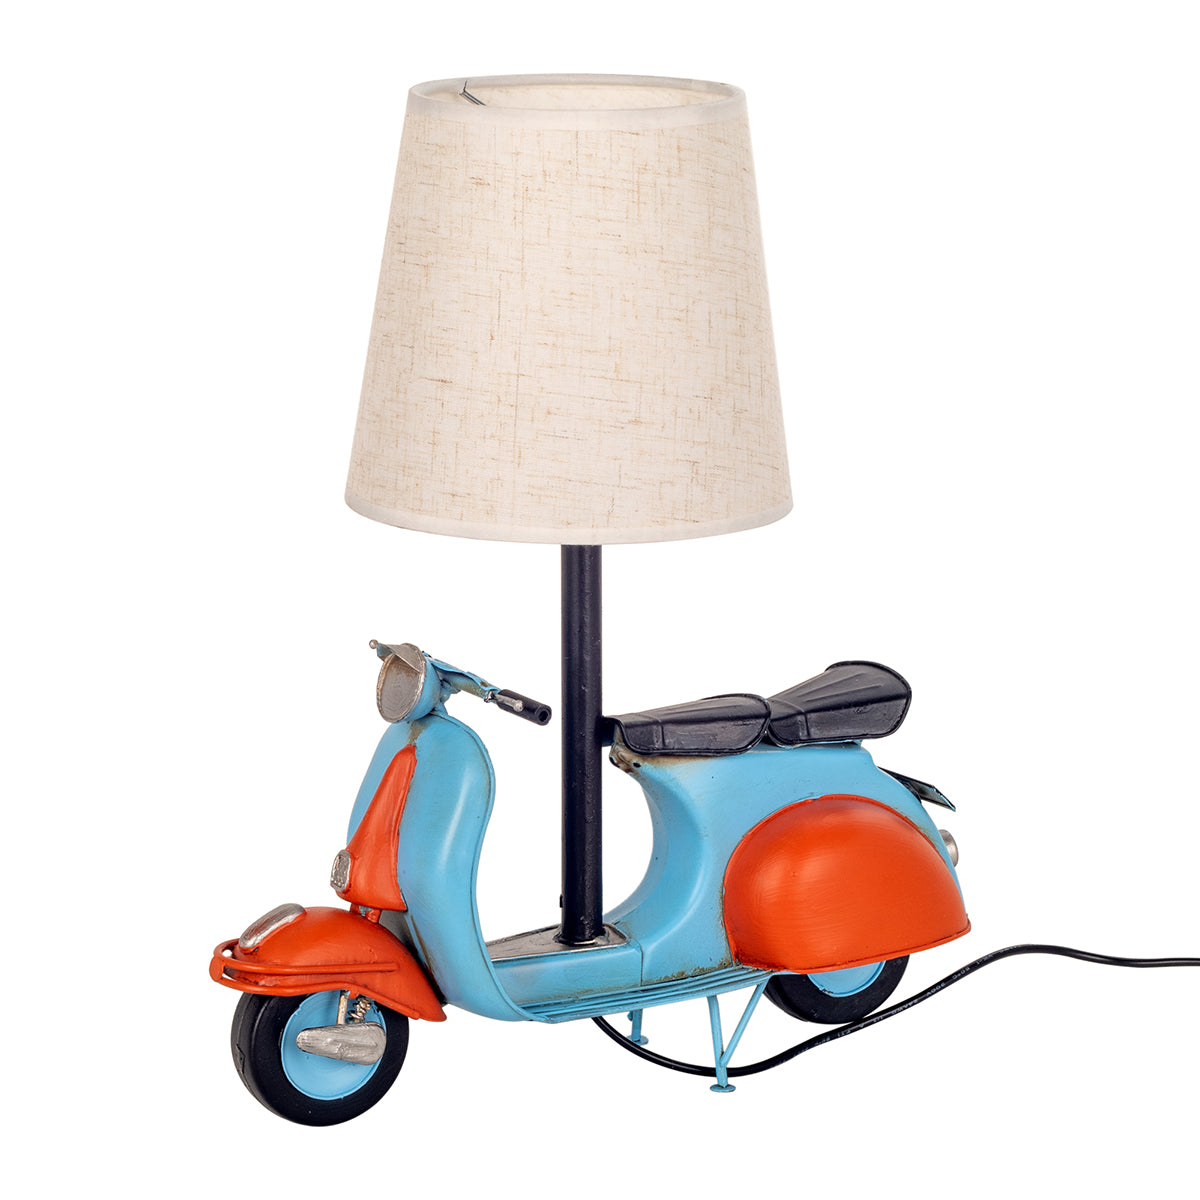 Lampara Scooter